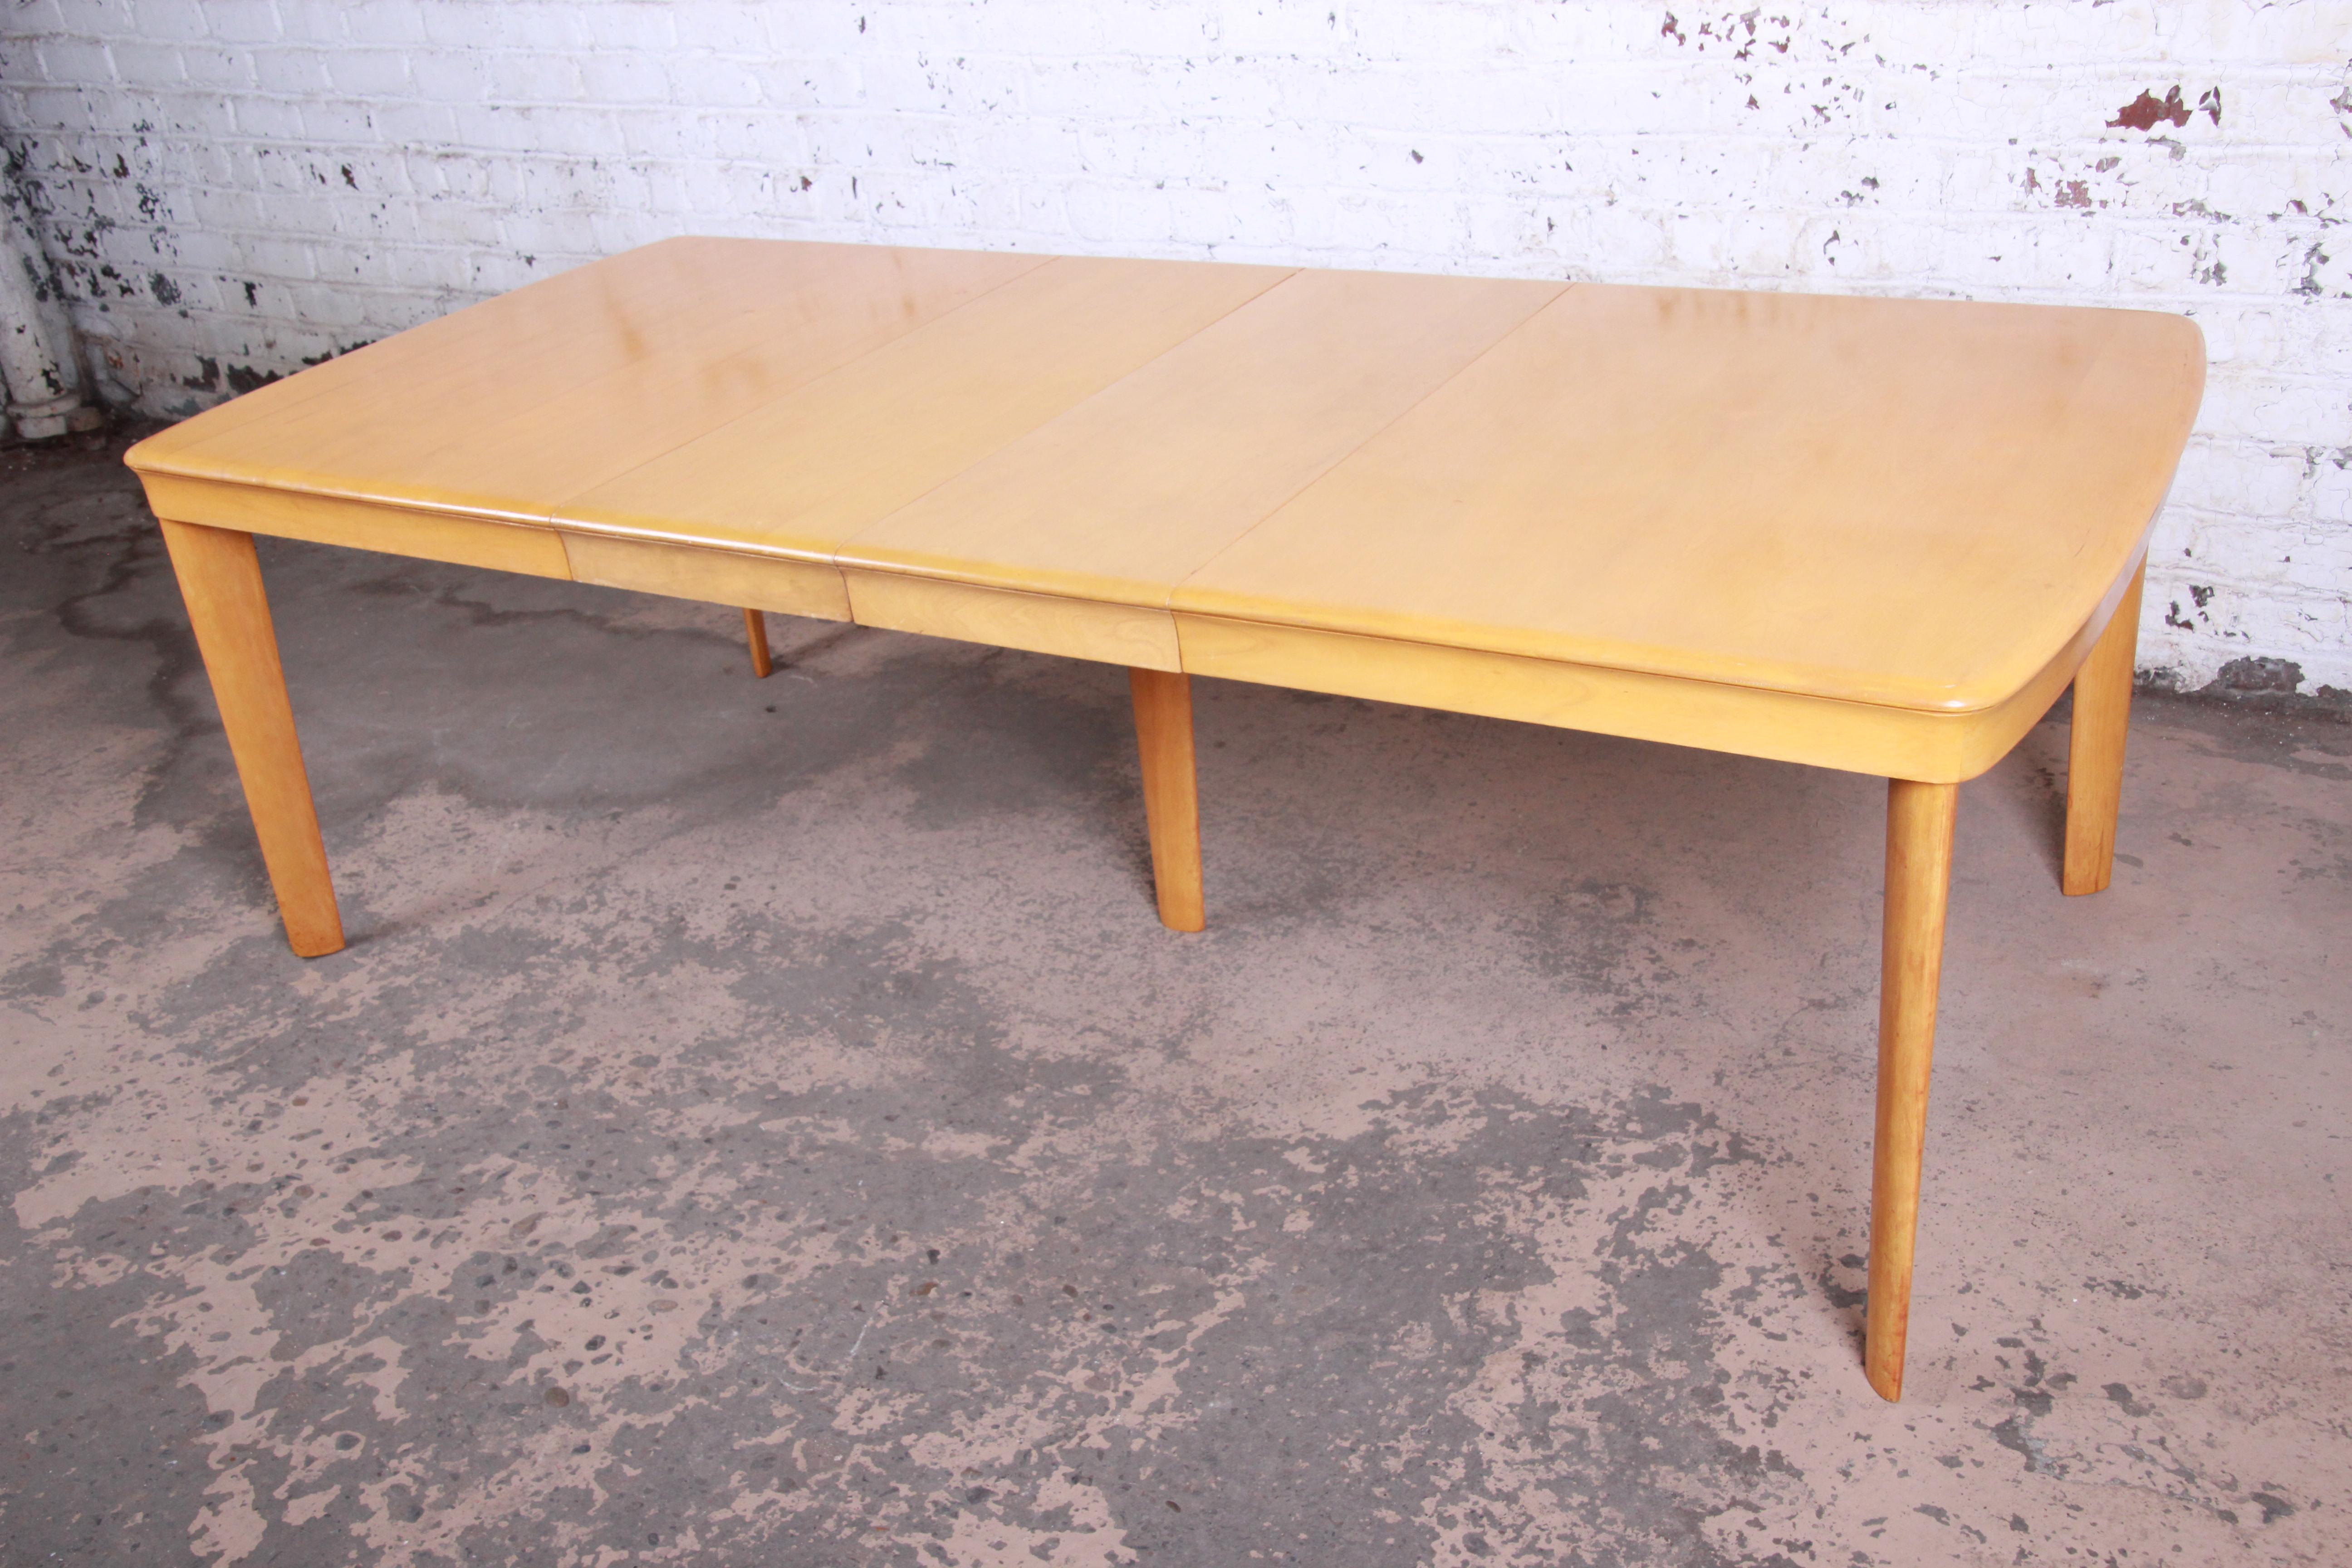 A gorgeous Mid-Century Modern extension dining table by Heywood Wakefield. The table features solid maple construction with beautiful wood grain. Made with the highest quality craftsmanship, as expected from Heywood Wakefield. The table extends to